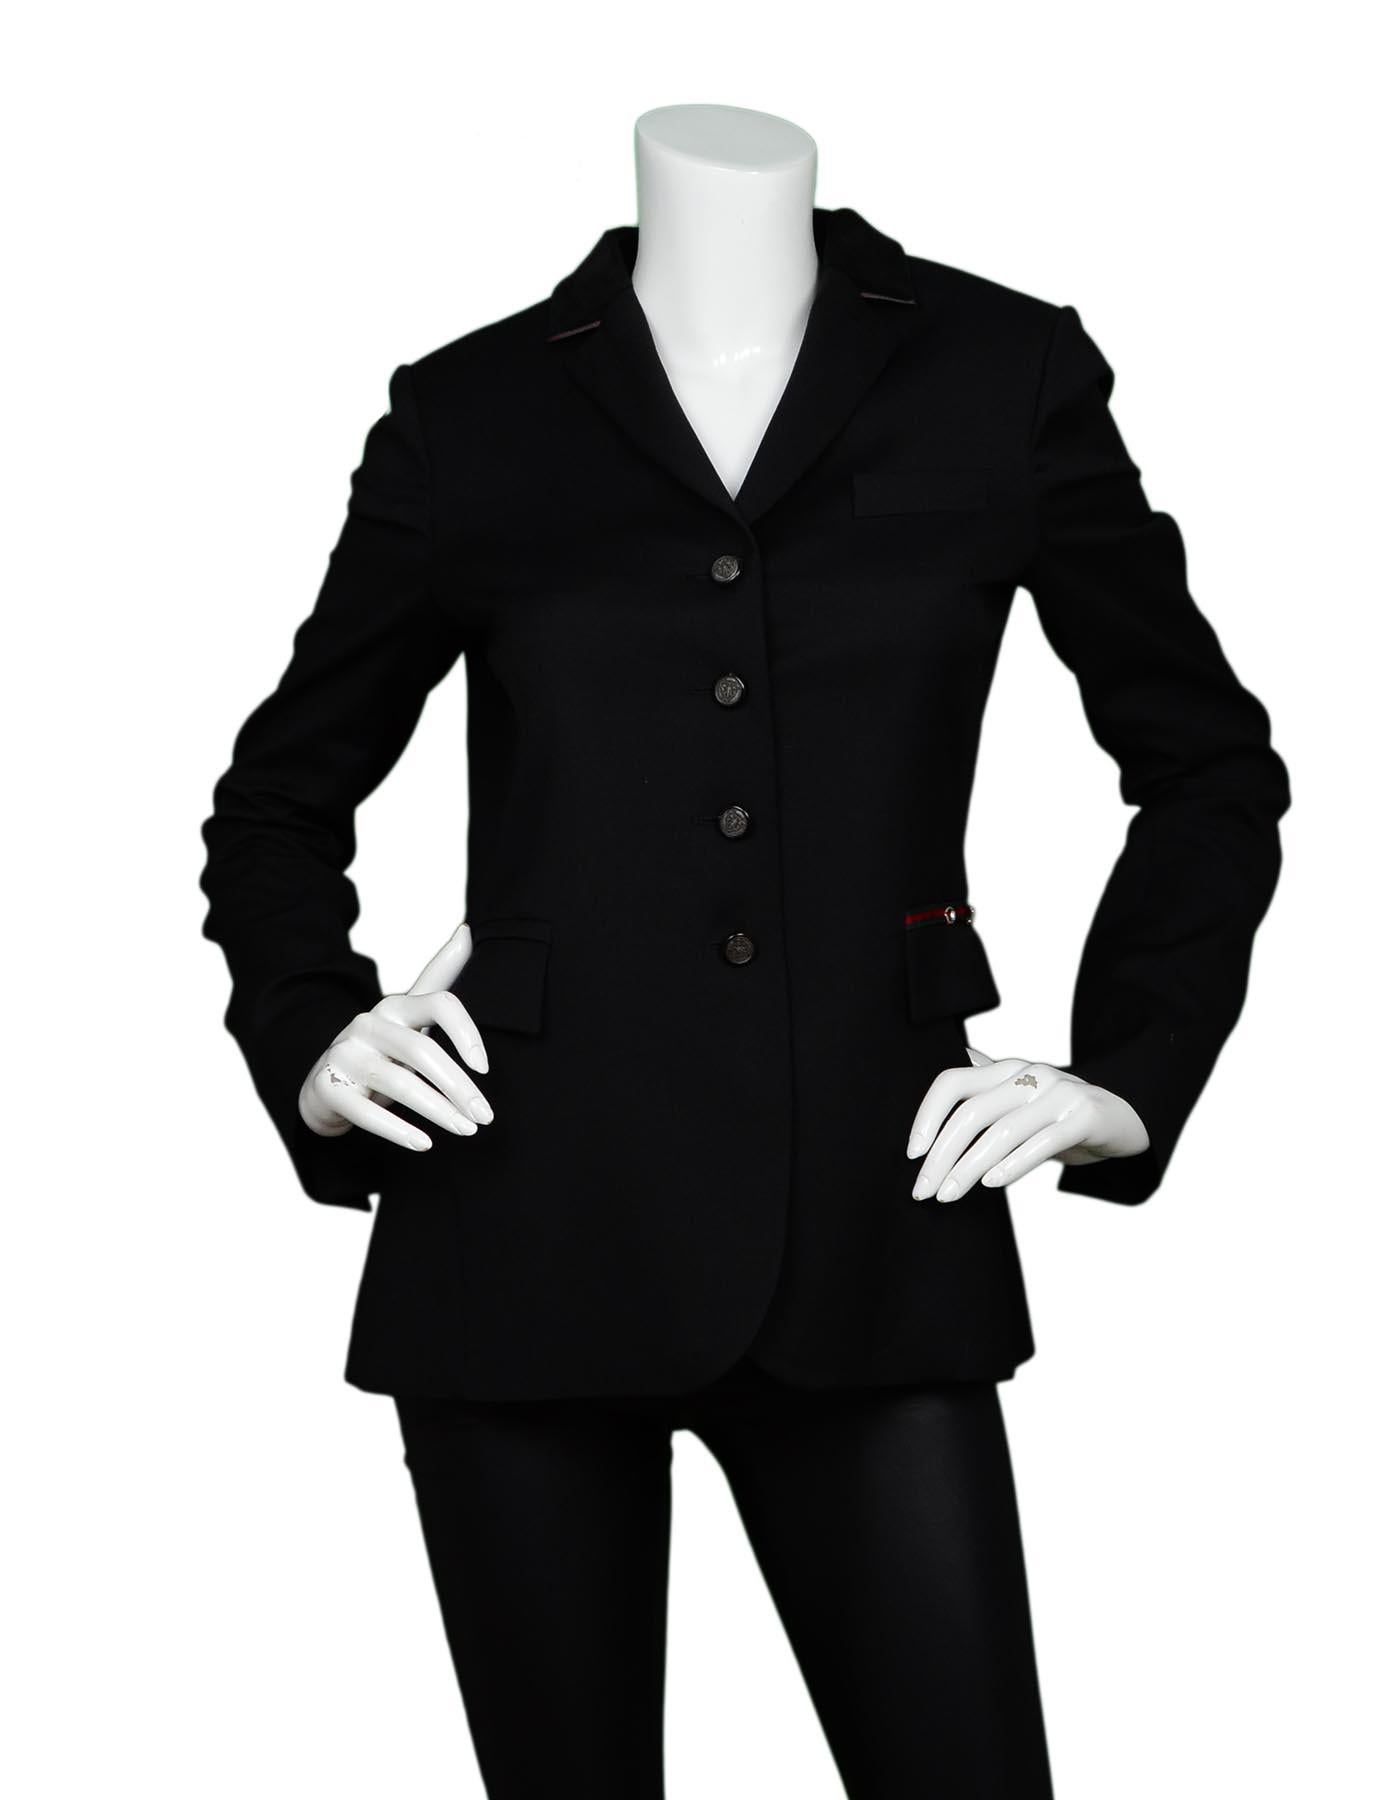 Gucci Black Equestrian Riding Jacket W/ Velvet & Web Trim Sz 42

Made In:   Italy
Color: Black
Materials: Fabric 1: 100% wool, Fabric 2: 74% cotton, 23% cotton, 3% elastane
Lining: 57% rayon, 43% polyester
Opening/Closure: Button front
Overall